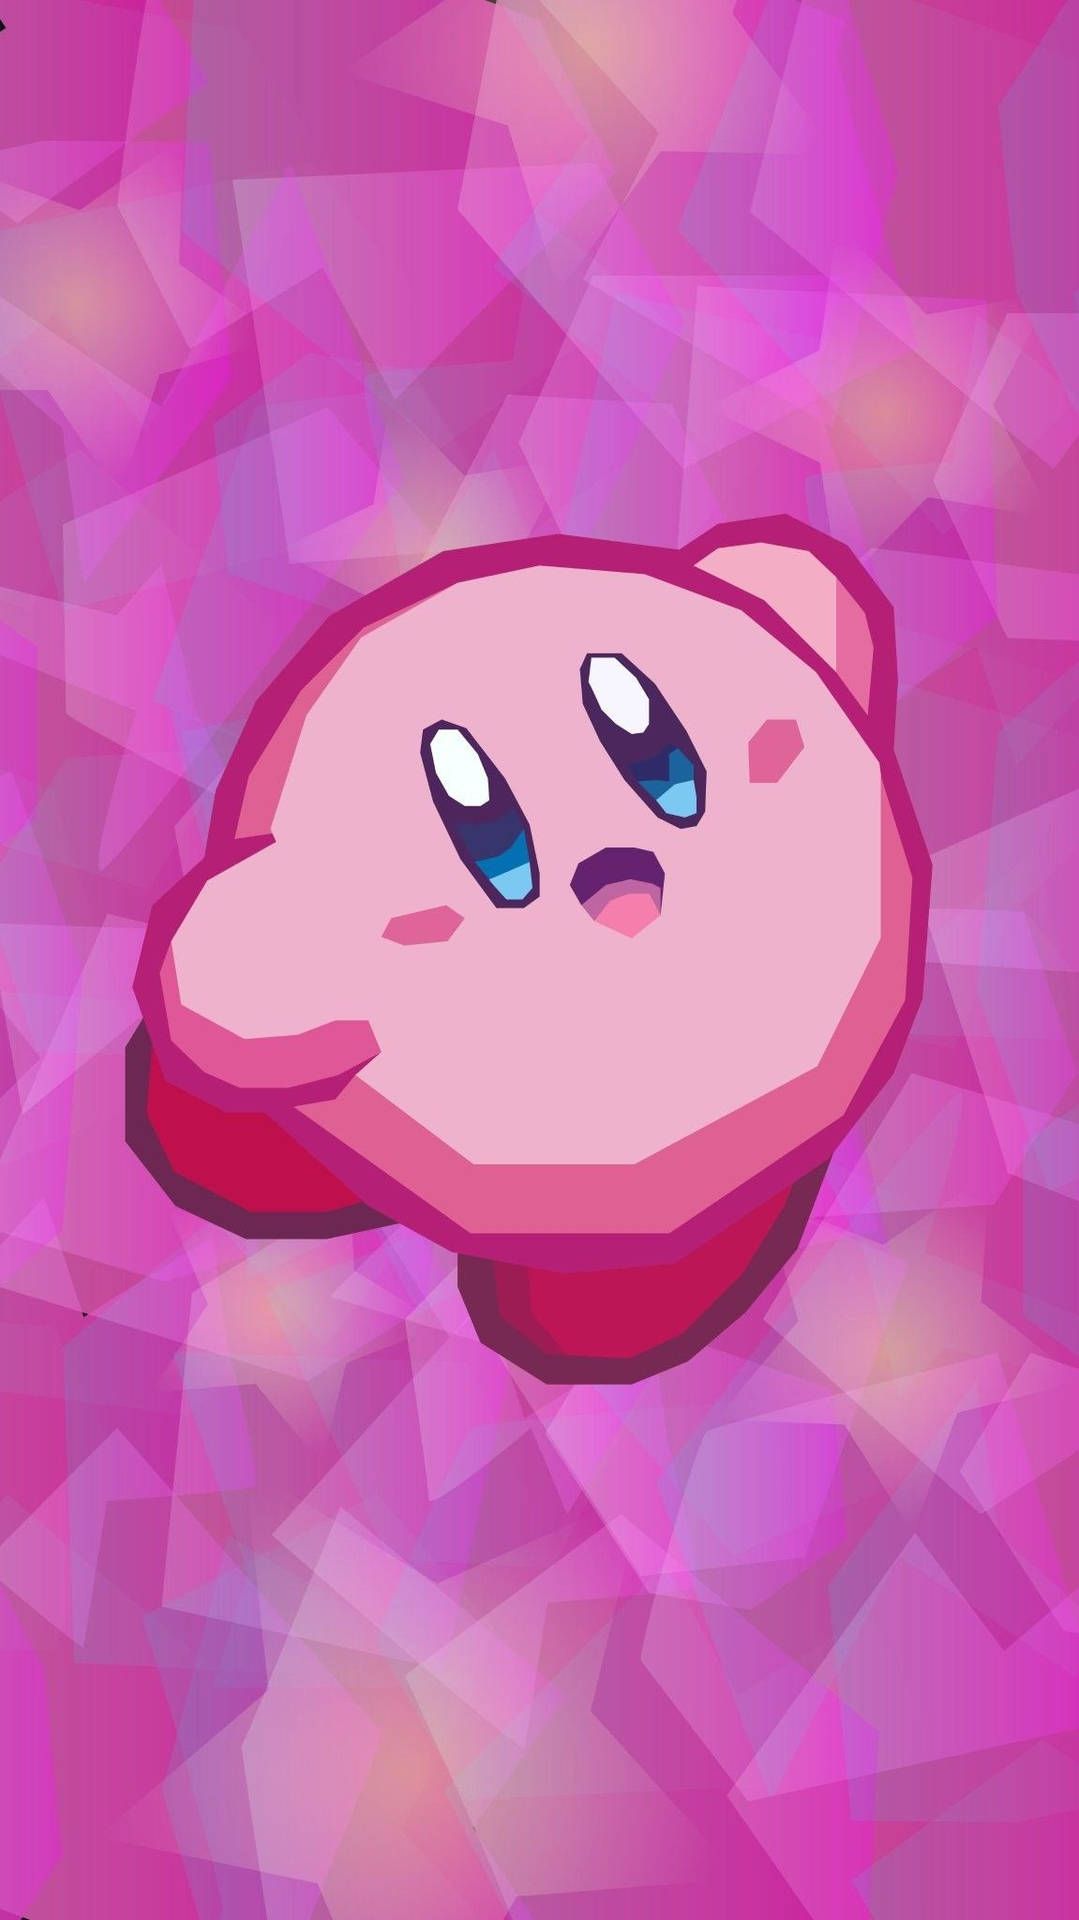 A pink Kirby character on a pink geometric background. - Kirby